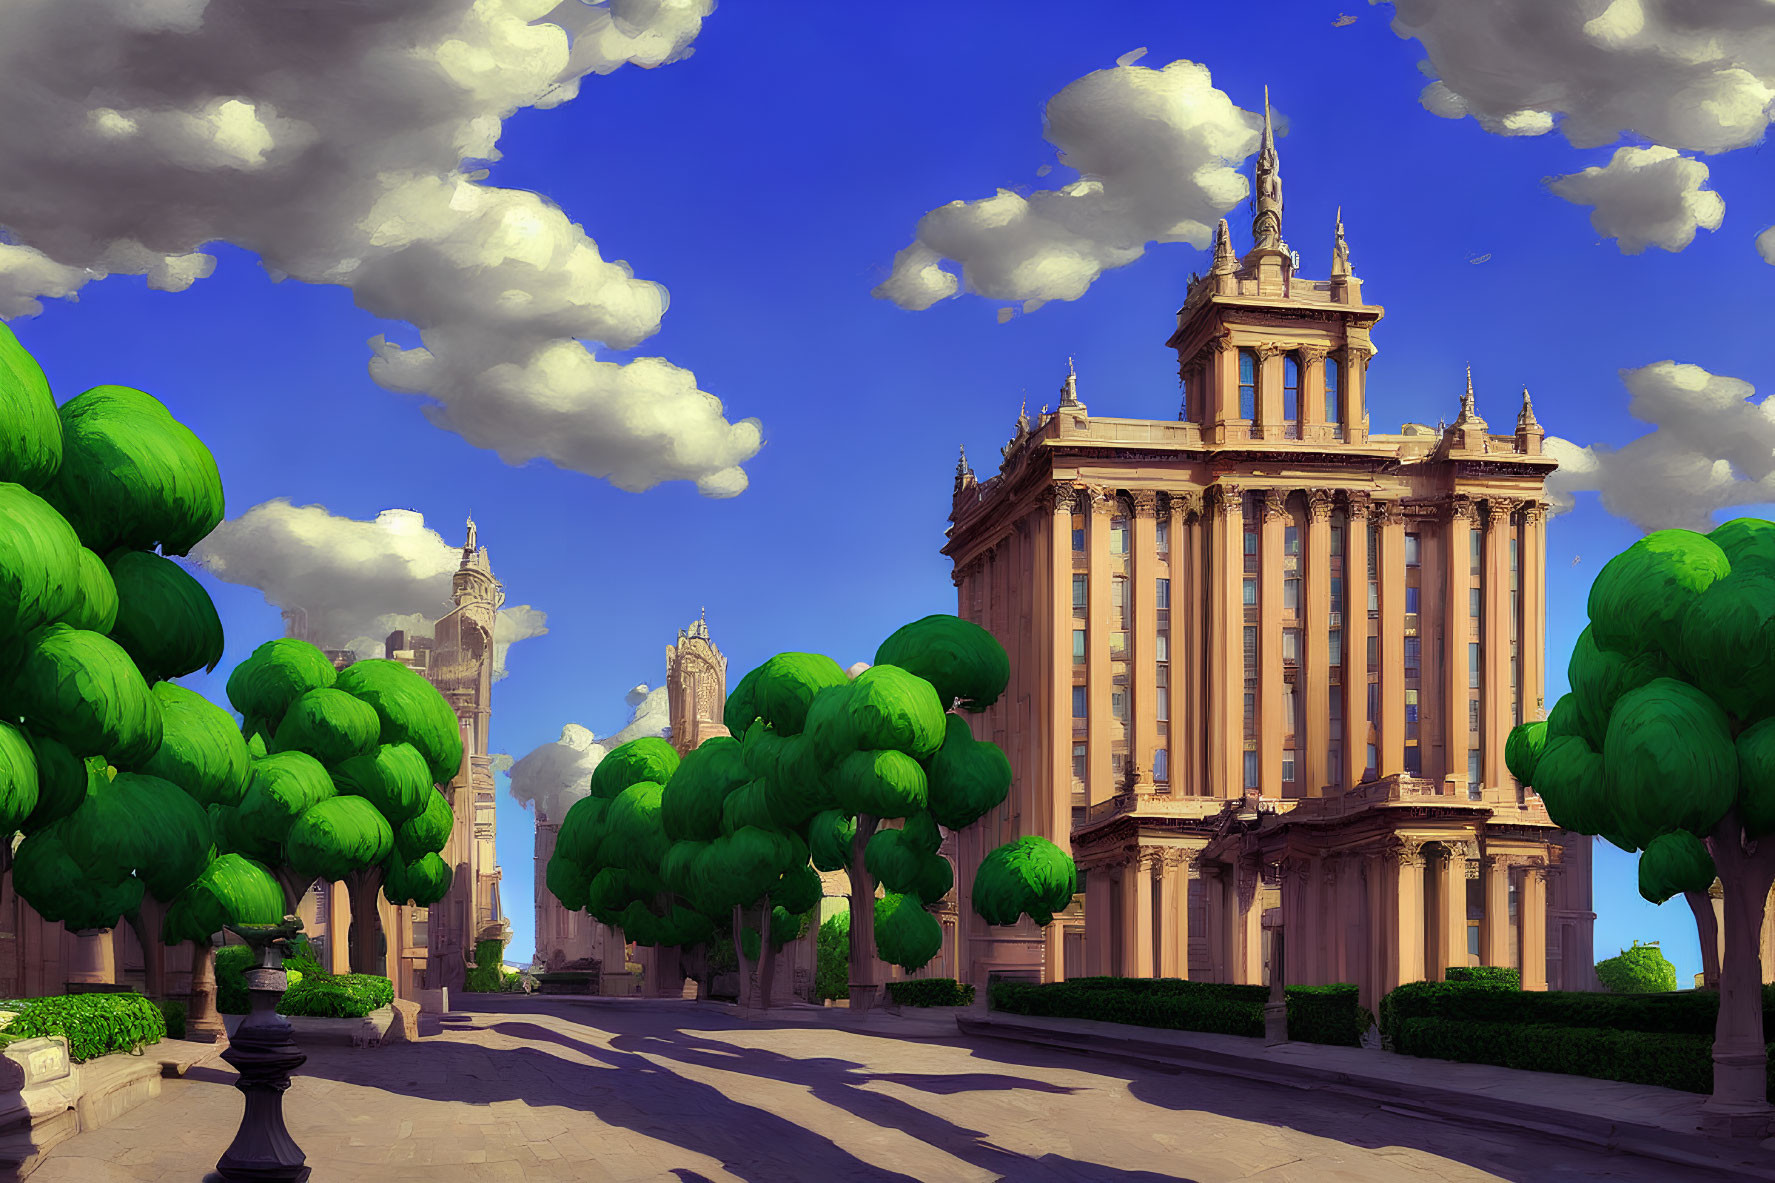 Digital artwork of sunny day with classical building and trees